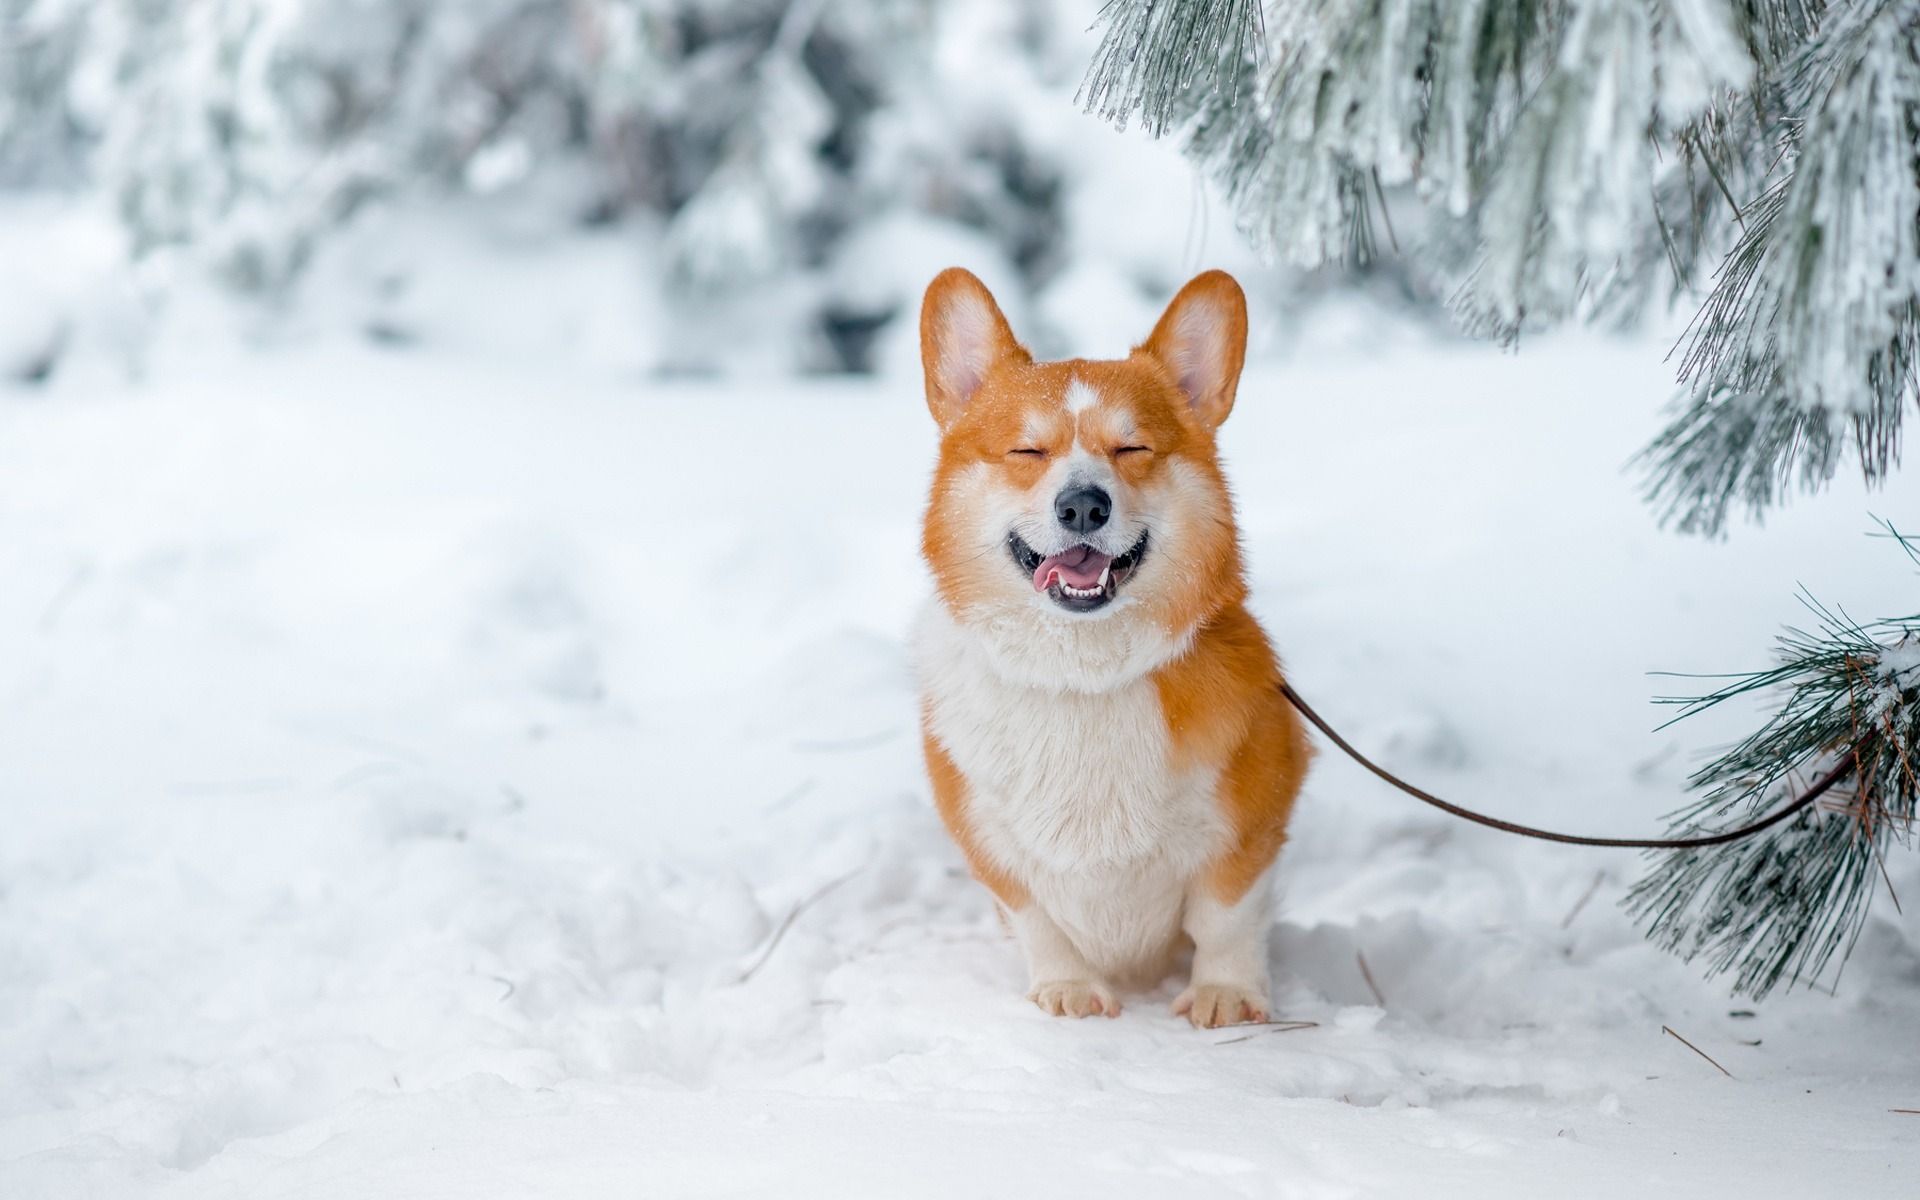 Download wallpaper Welsh Corgi, ginger dog, winter, snow, forest, pets, dogs, breeds of dogs, 4k for desktop with resolution 1920x1200. High Quality HD picture wallpaper